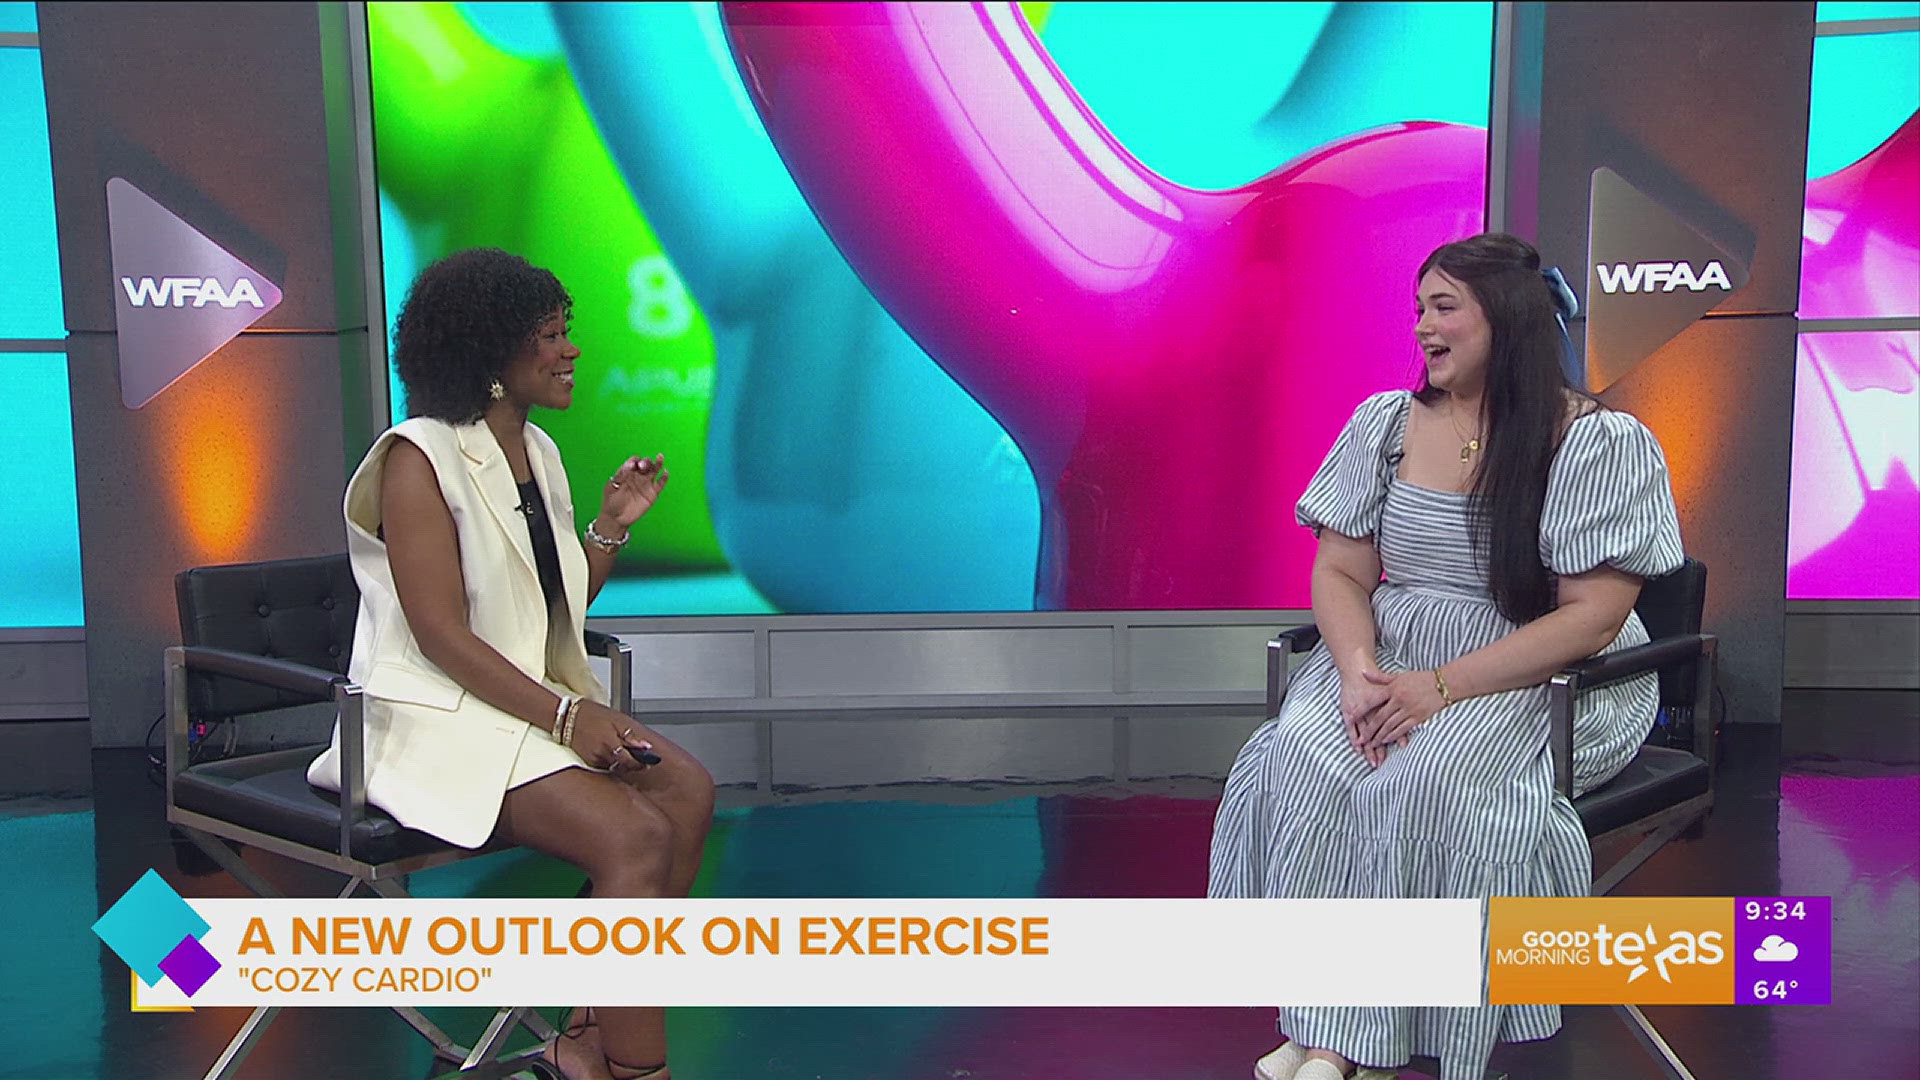 Hope Zuckerbrow, the creator of the viral fitness trend "Cozy Cardio" tells us how this trend is giving people a new outlook on exercise.